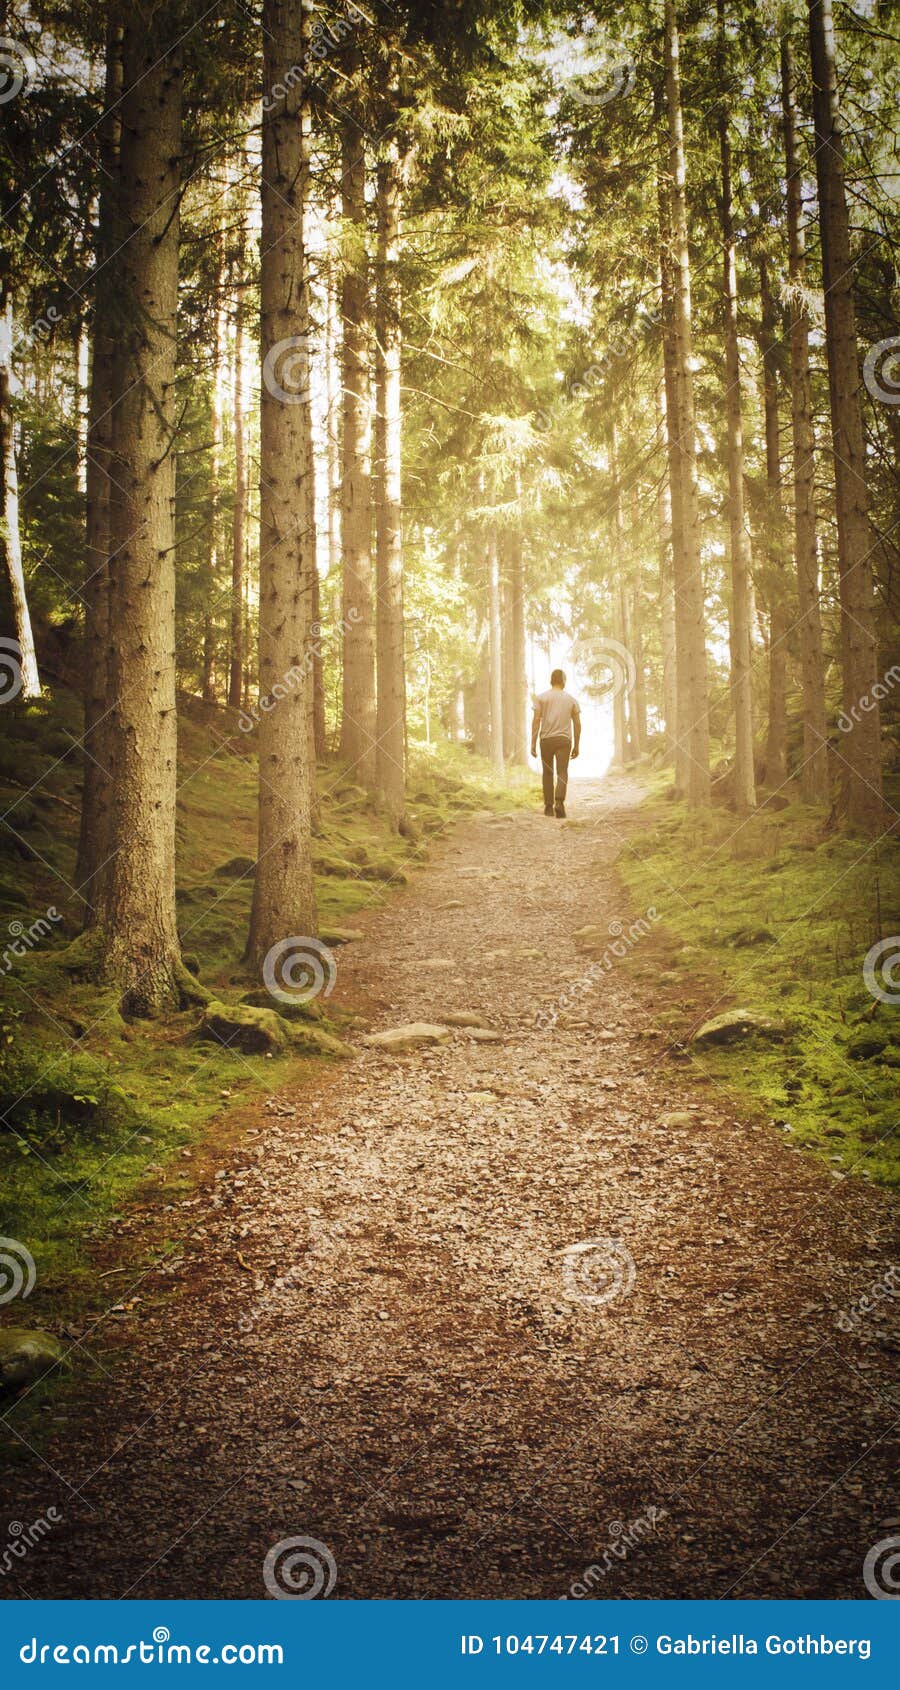 man walking up path towards the light in magic forest.